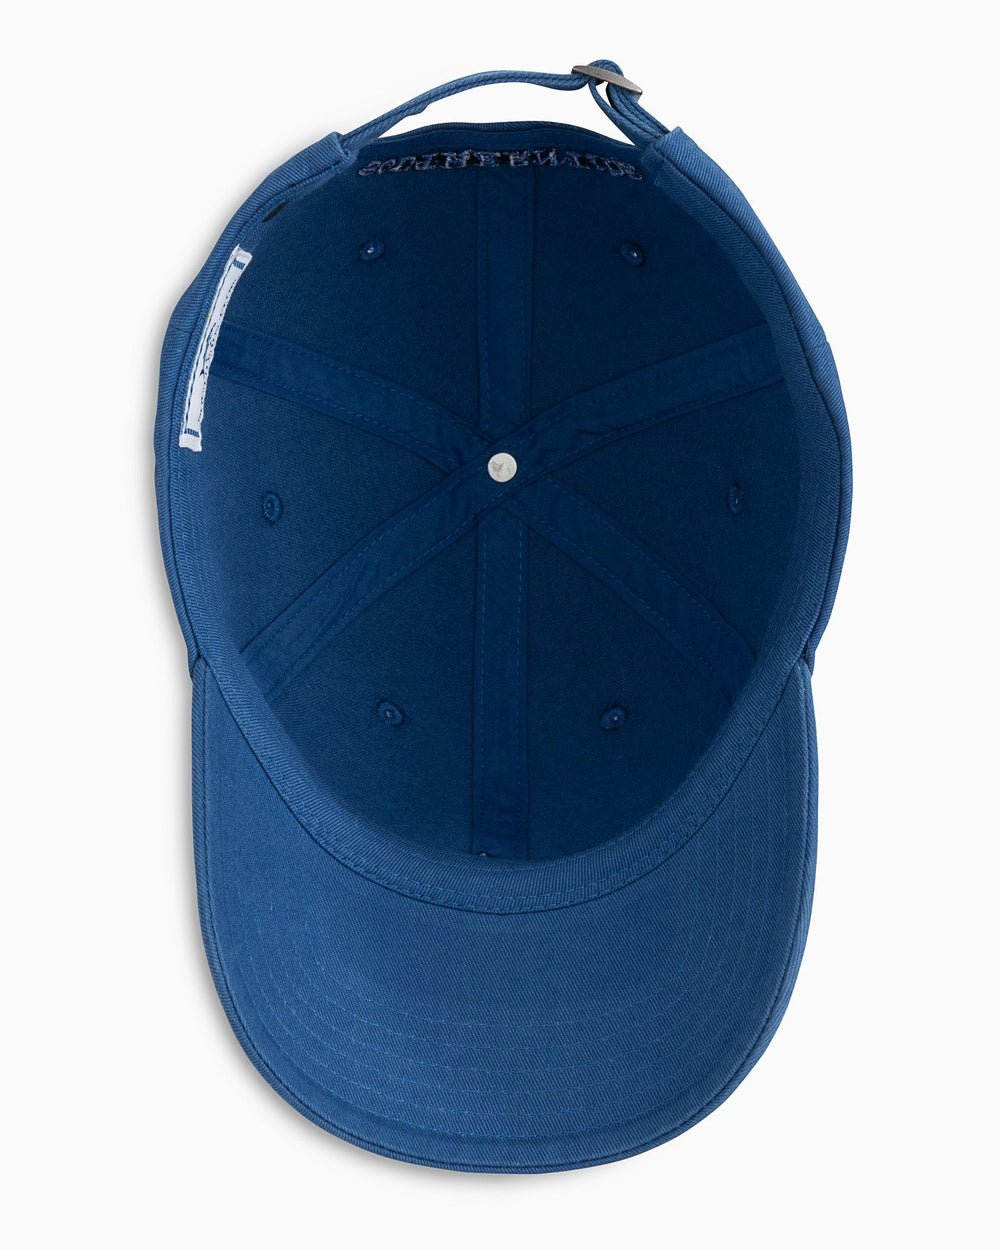 The inside of the Skipjack Hat by Southern Tide - Boat Blue